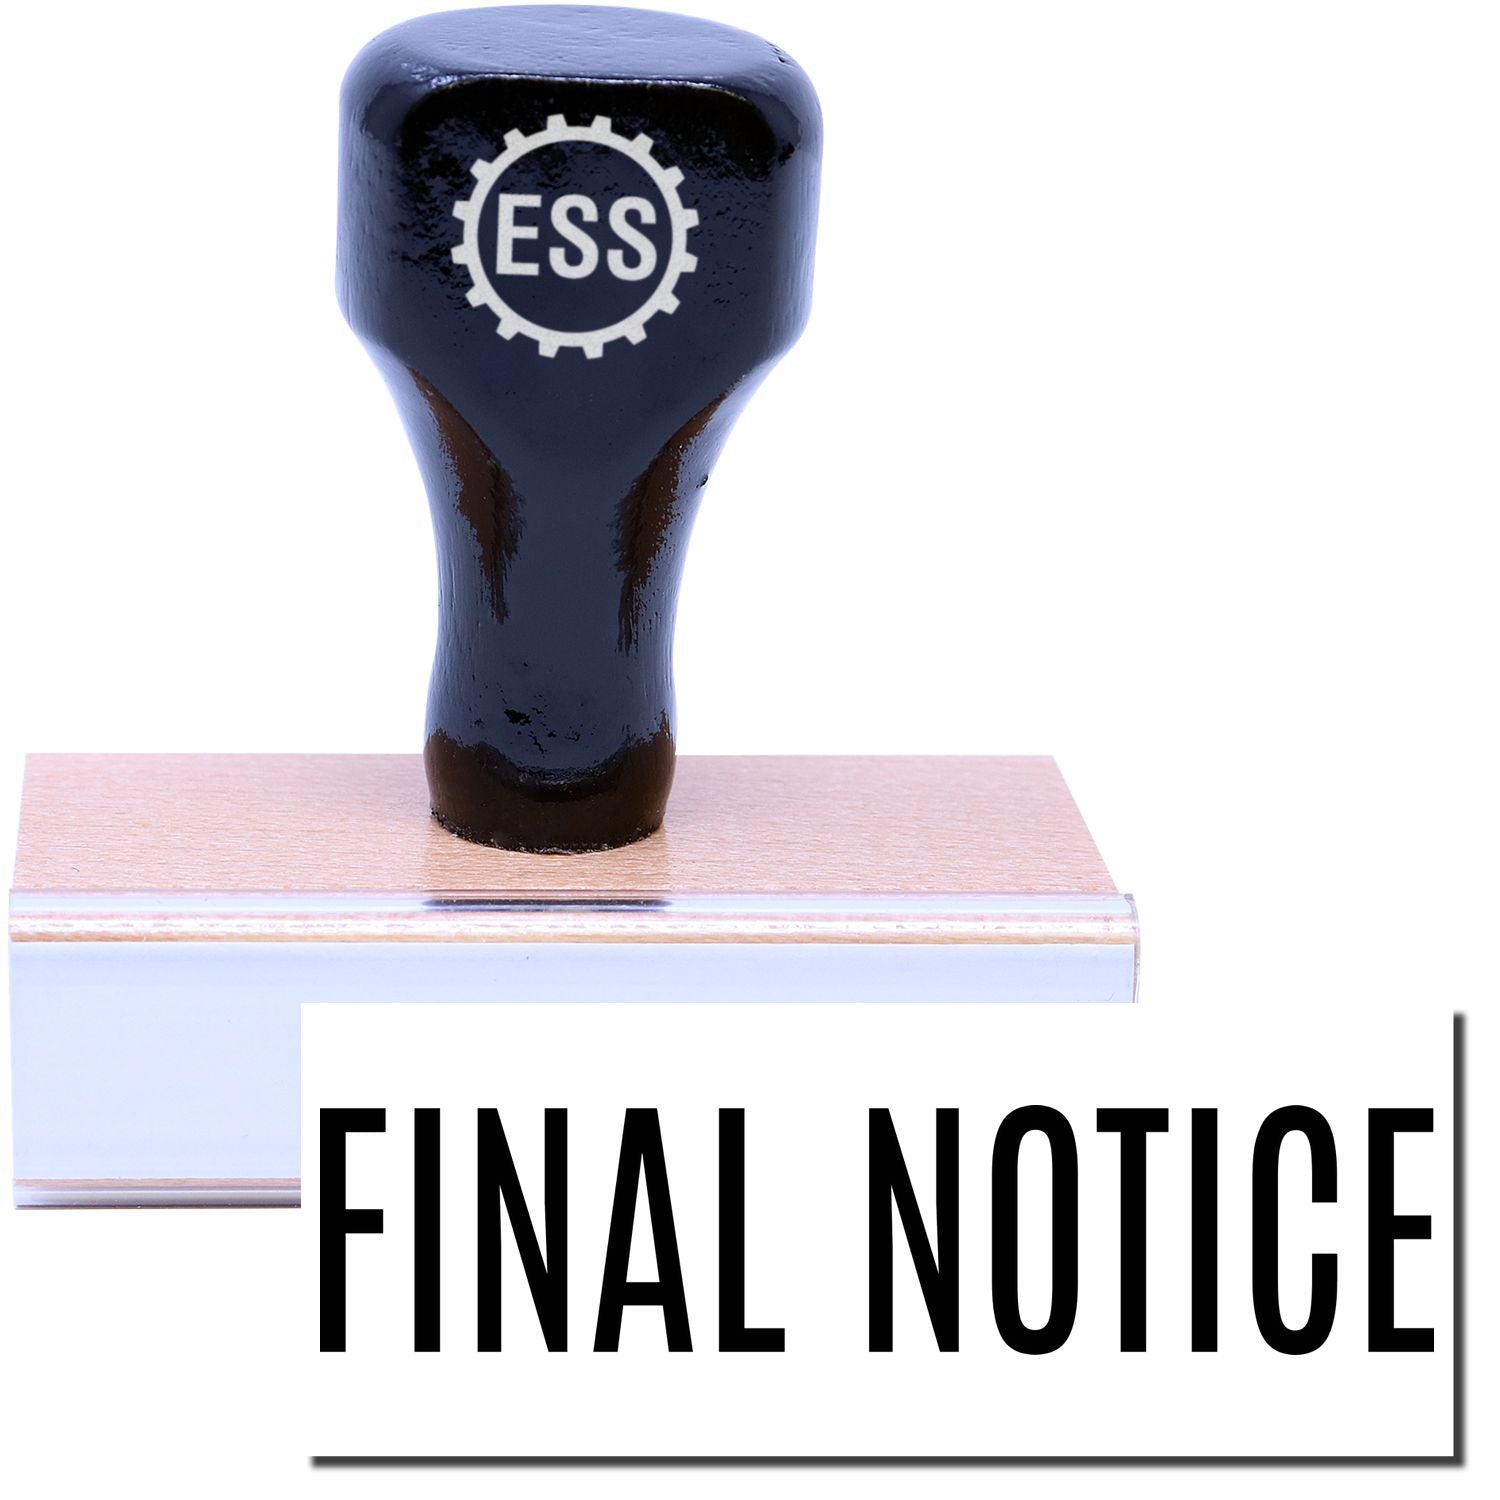 A stock office rubber stamp with a stamped image showing how the text "FINAL NOTICE" In a narrow font is displayed after stamping.